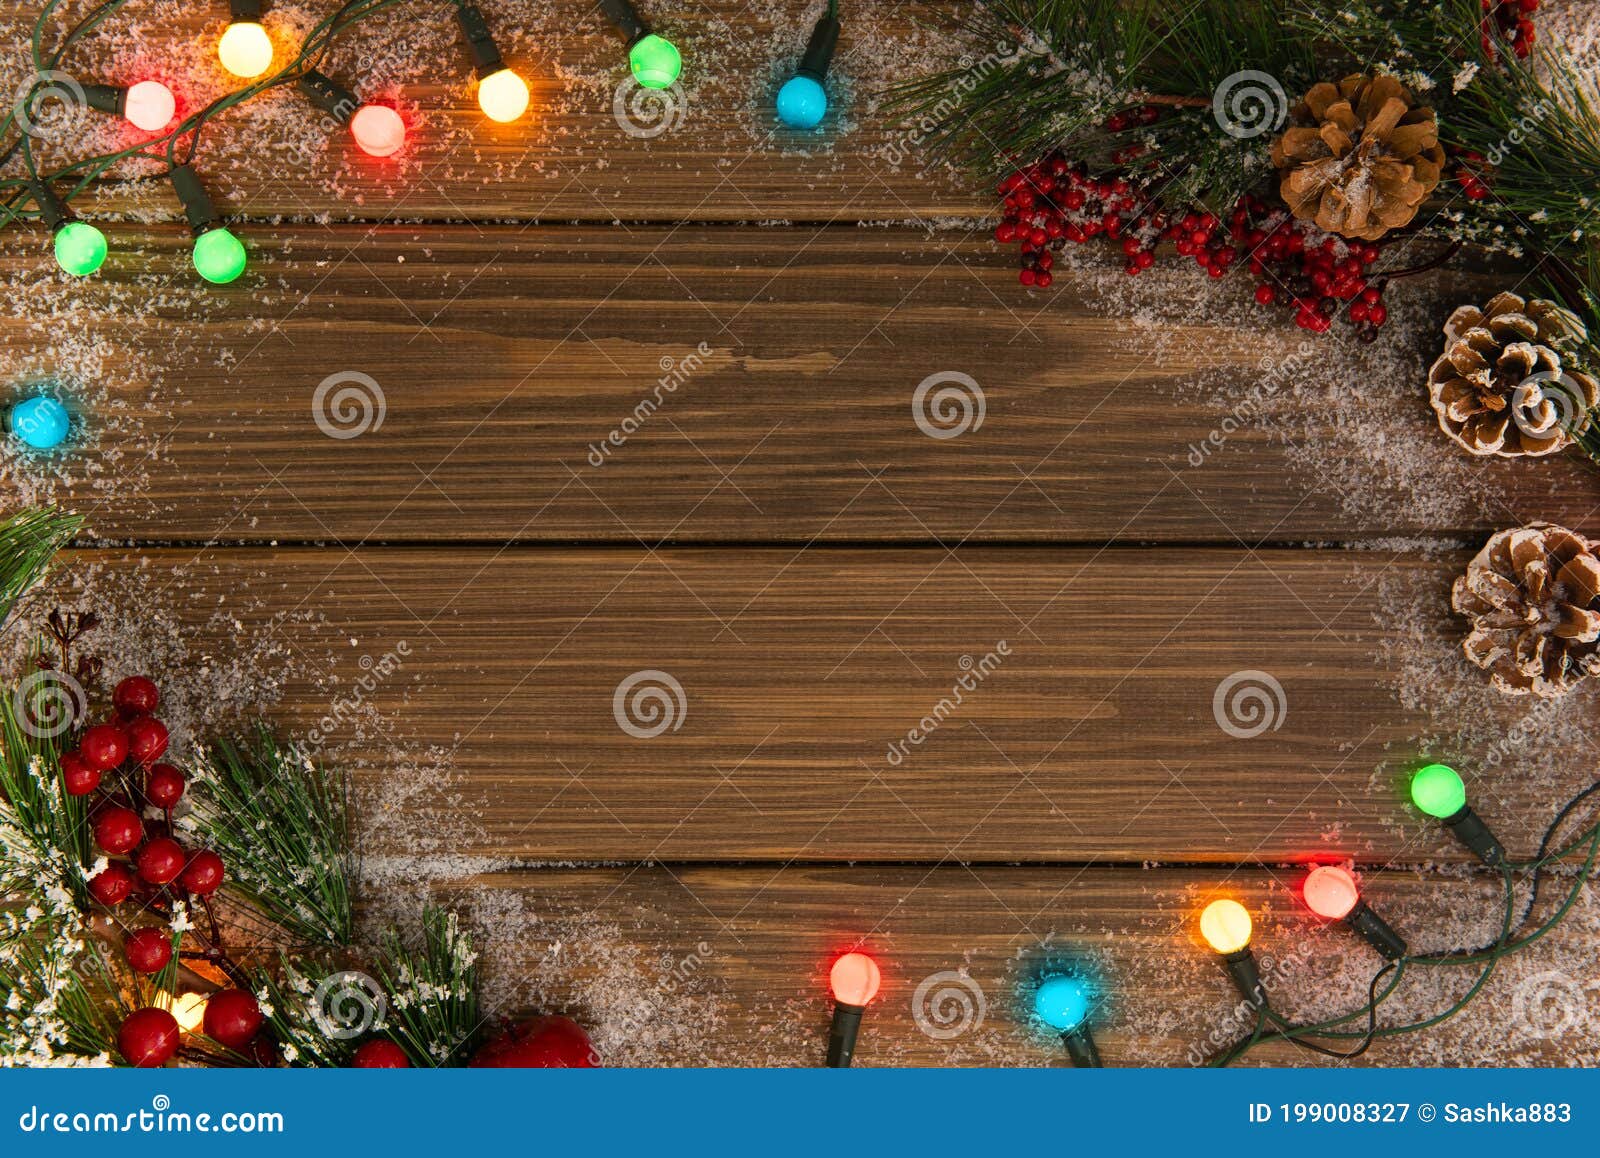 Christmas Wooden Background with Glowing Garland. Stock Image - Image ...